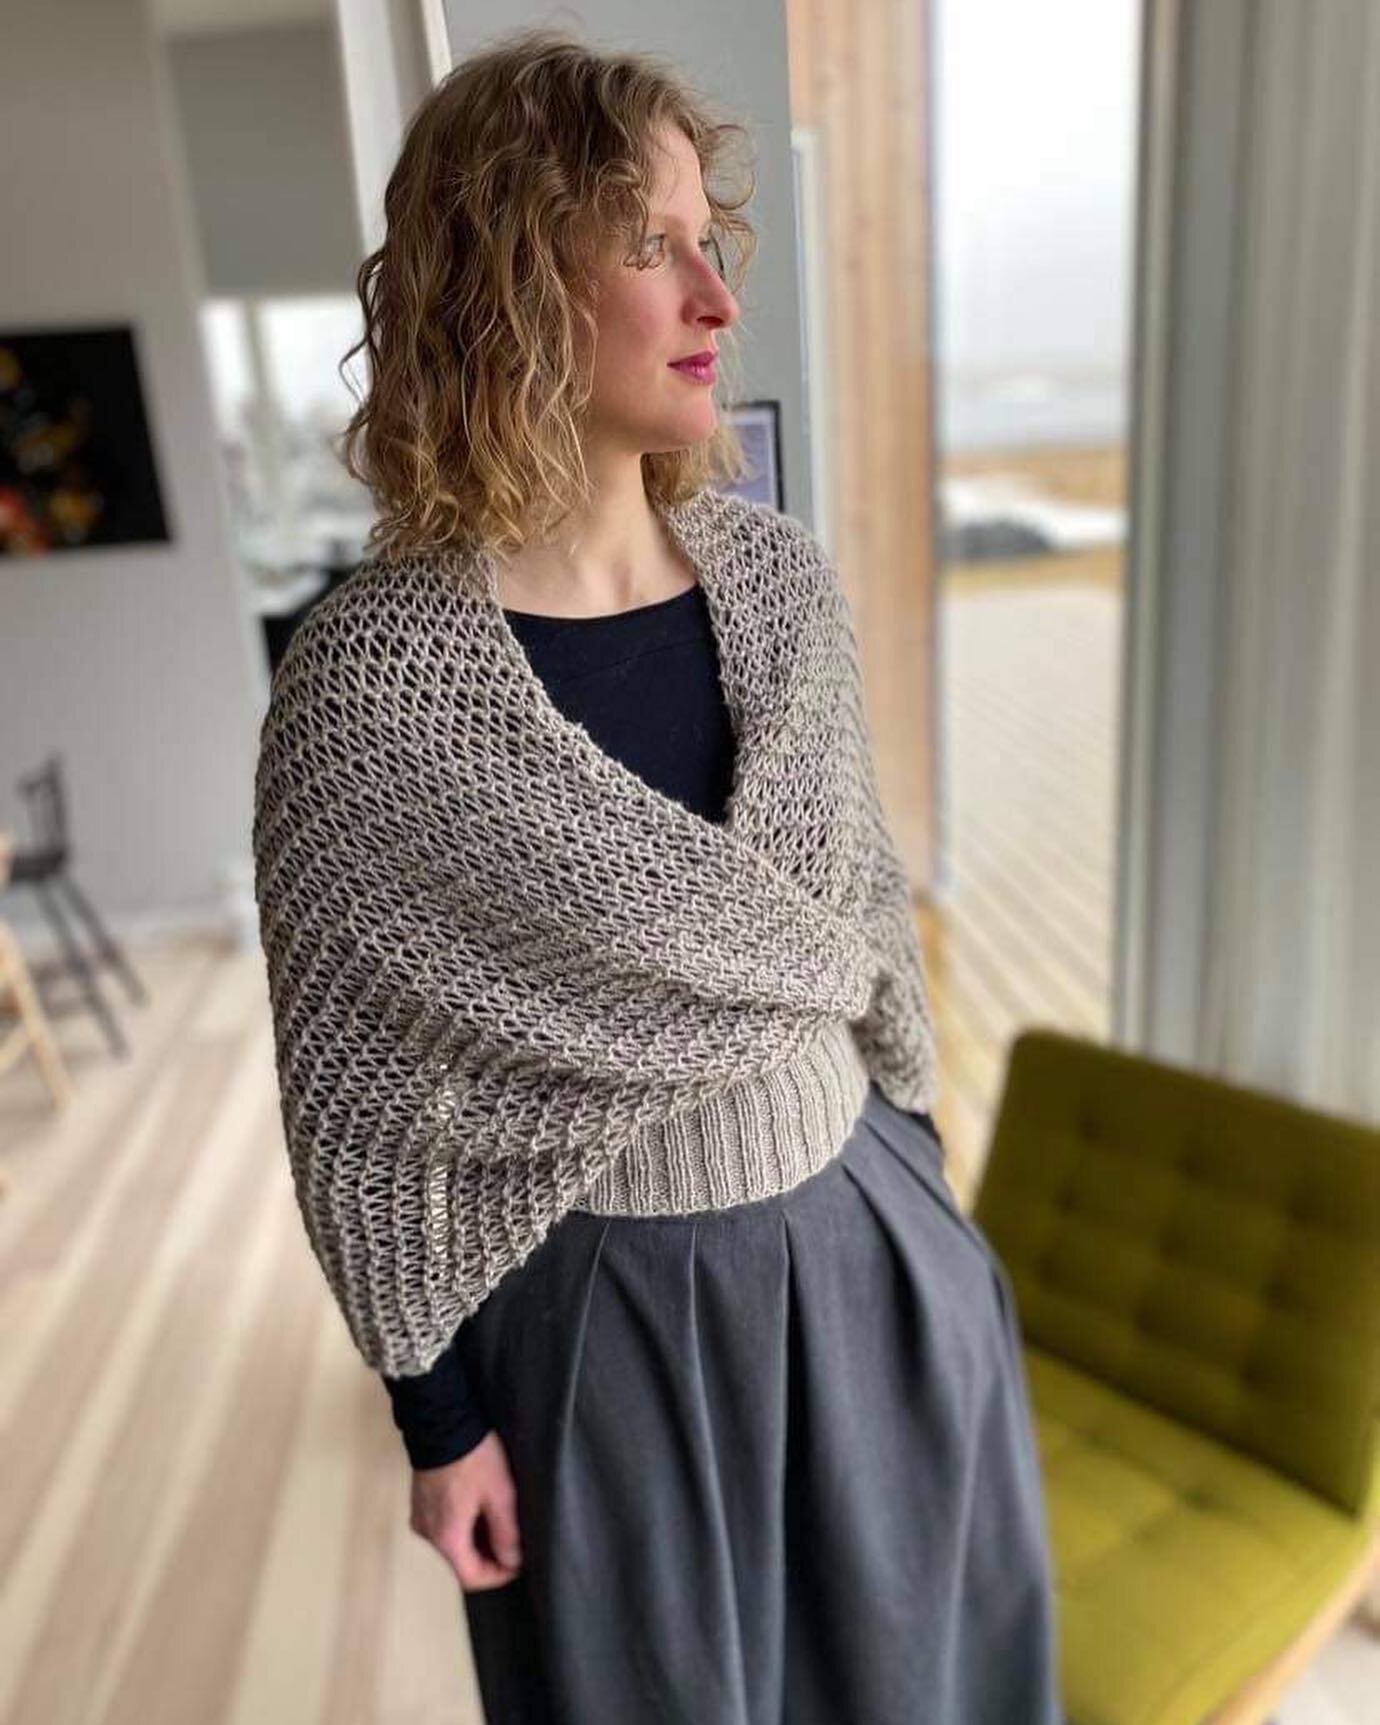 My gorgeous cousin, Eygl&oacute;, wearing her lovely version of Allegro Shawl! 
This pattern is always one of my best sellers and I&rsquo;m planning a relaunch of the pattern. Watch this space! 
Link to buy the pattern right now is in my stories!

Pa